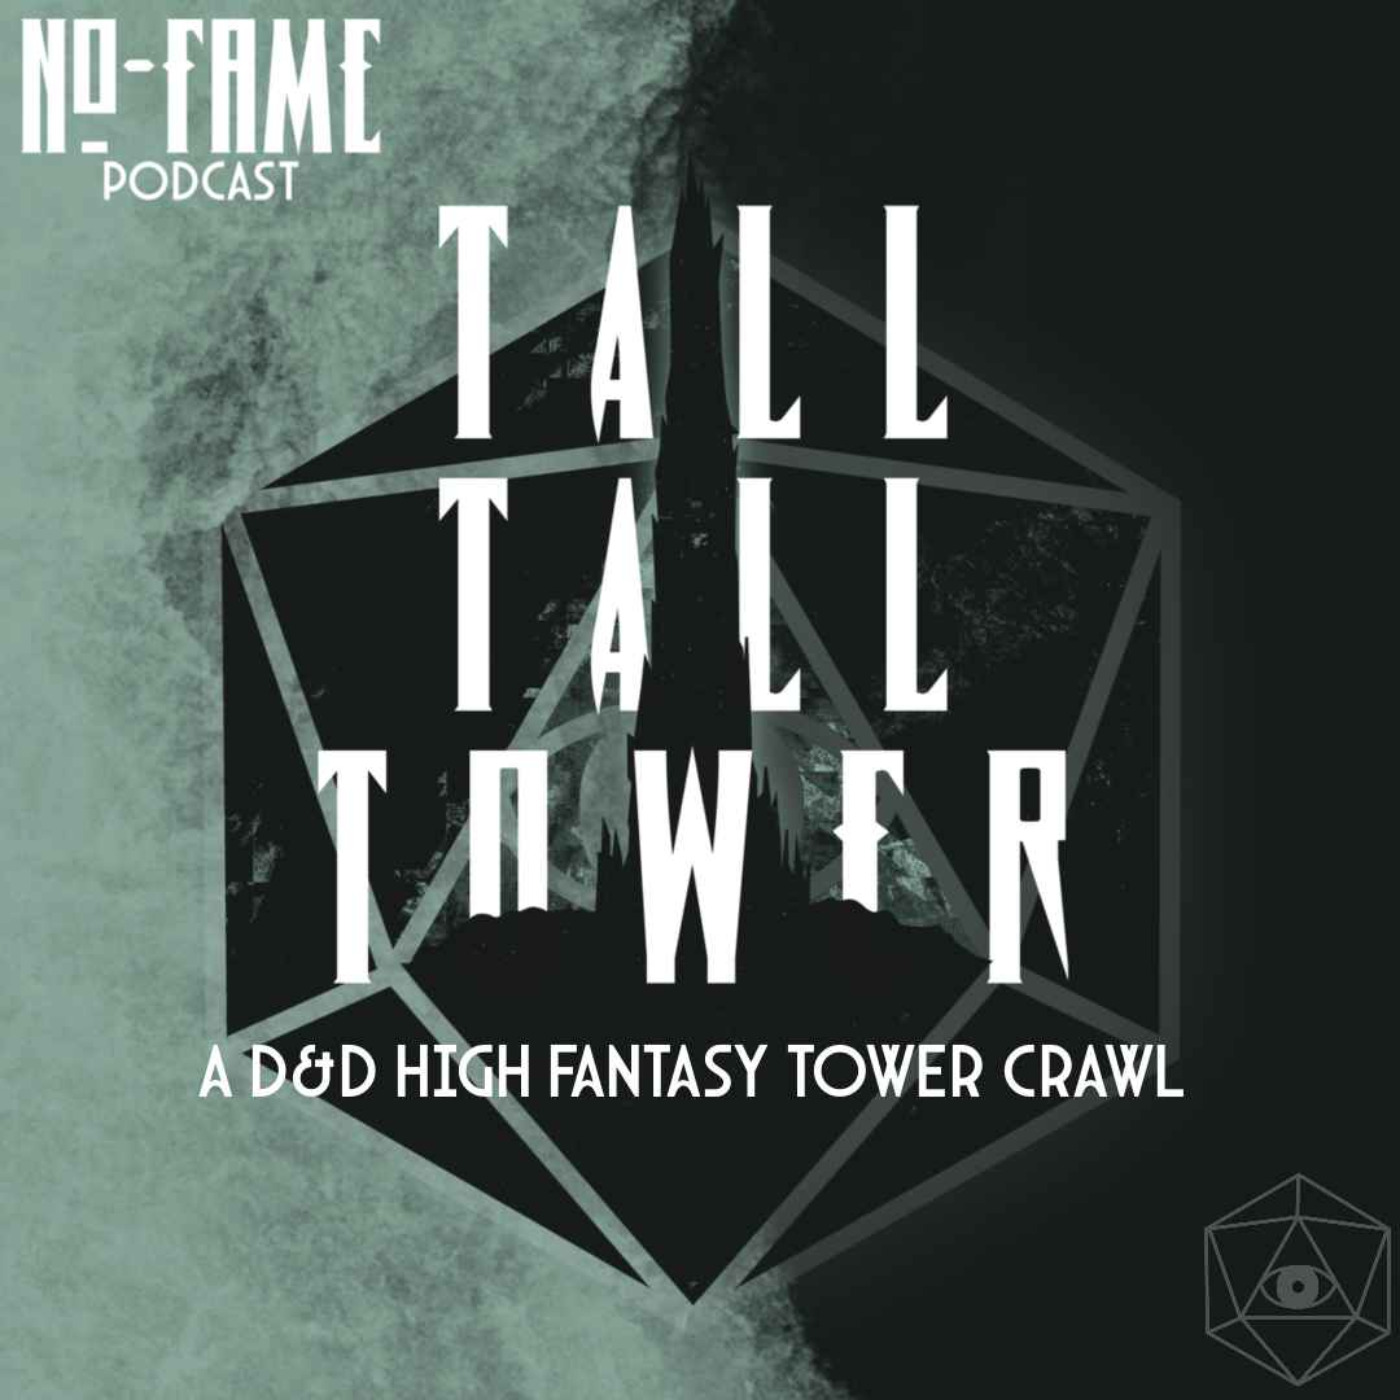 Tall Tall Tower - A Dungeons and Dragons Tower Crawl Series